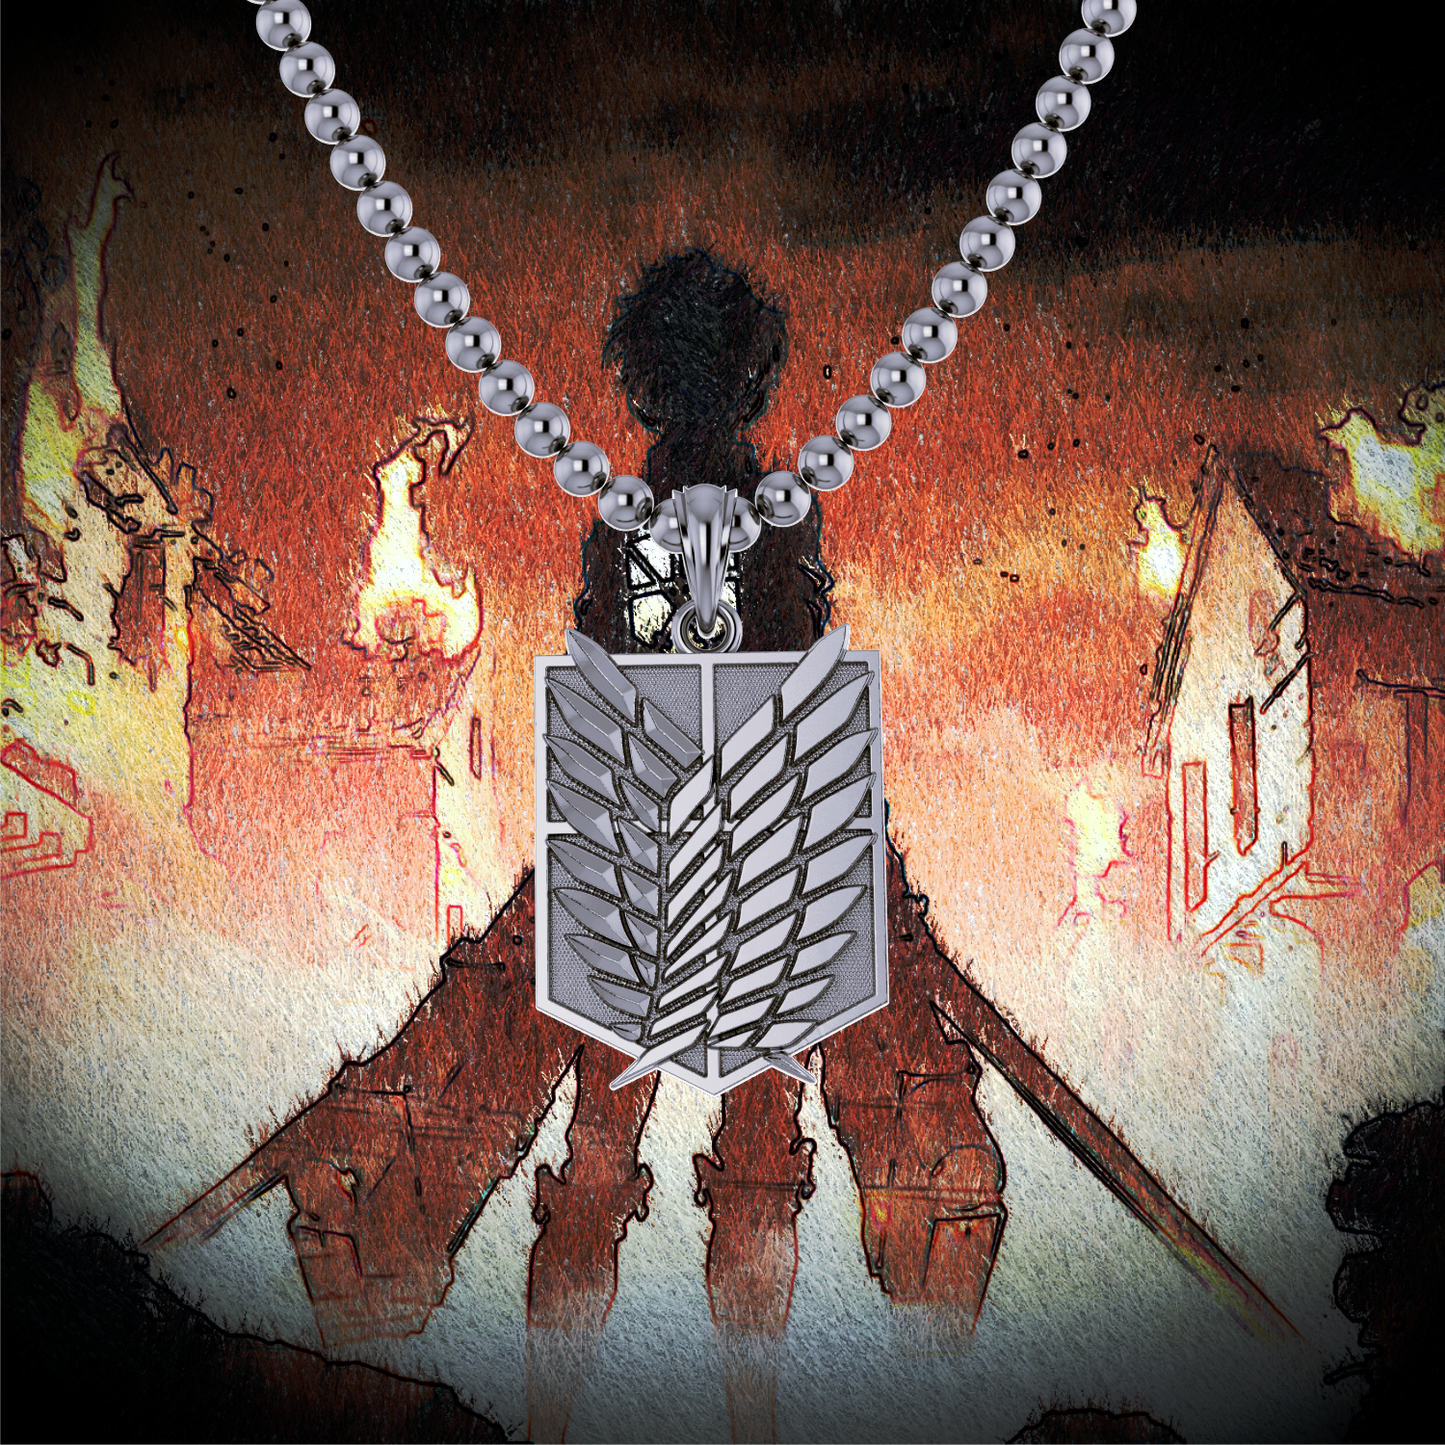 Wings of Freedom Pendant